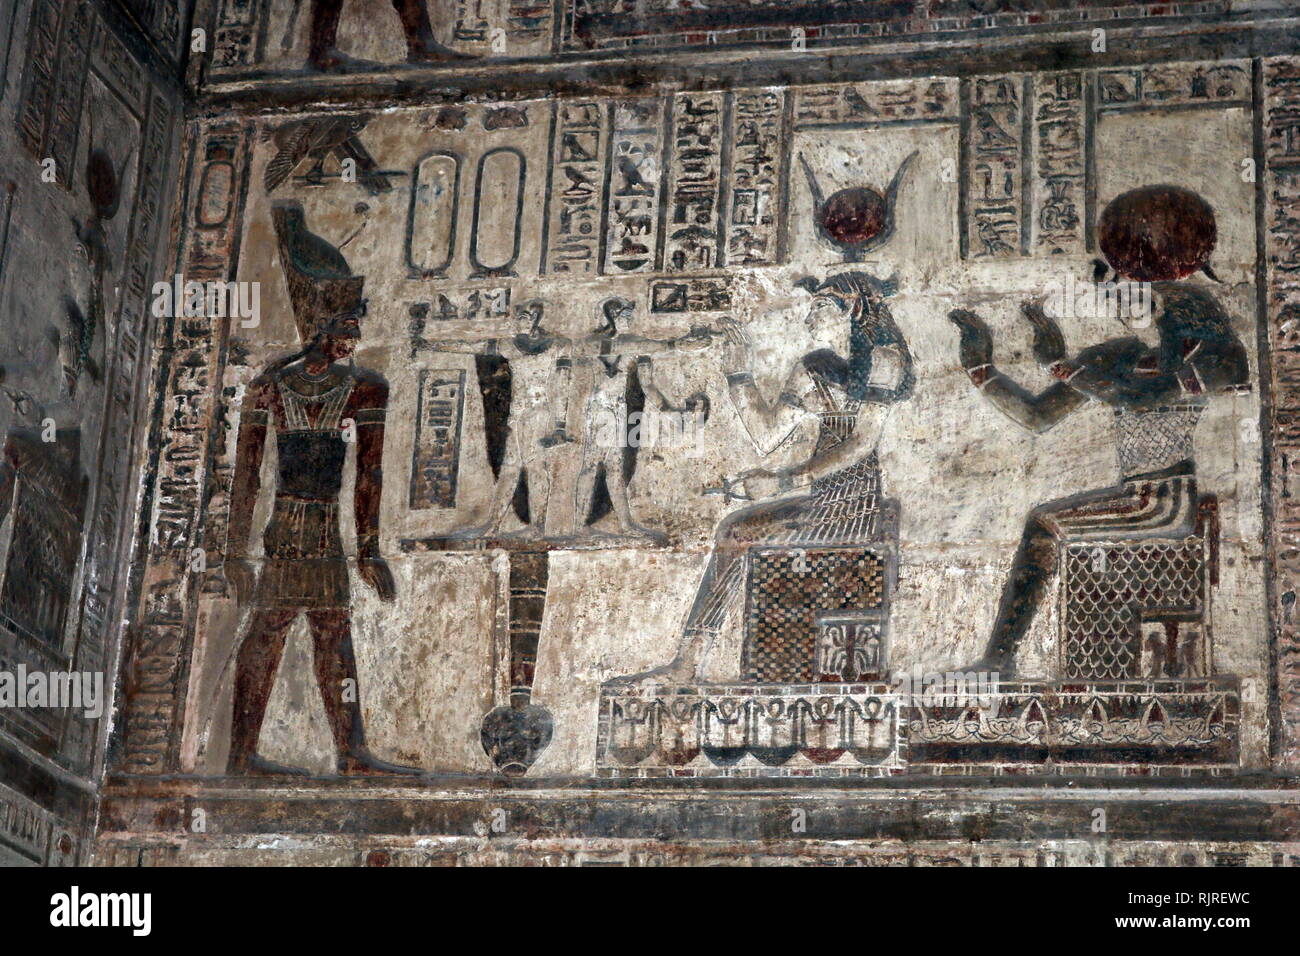 King in front of Hathor and Horus; relief at the Temple of Hathor, Dendera, Egypt Stock Photo